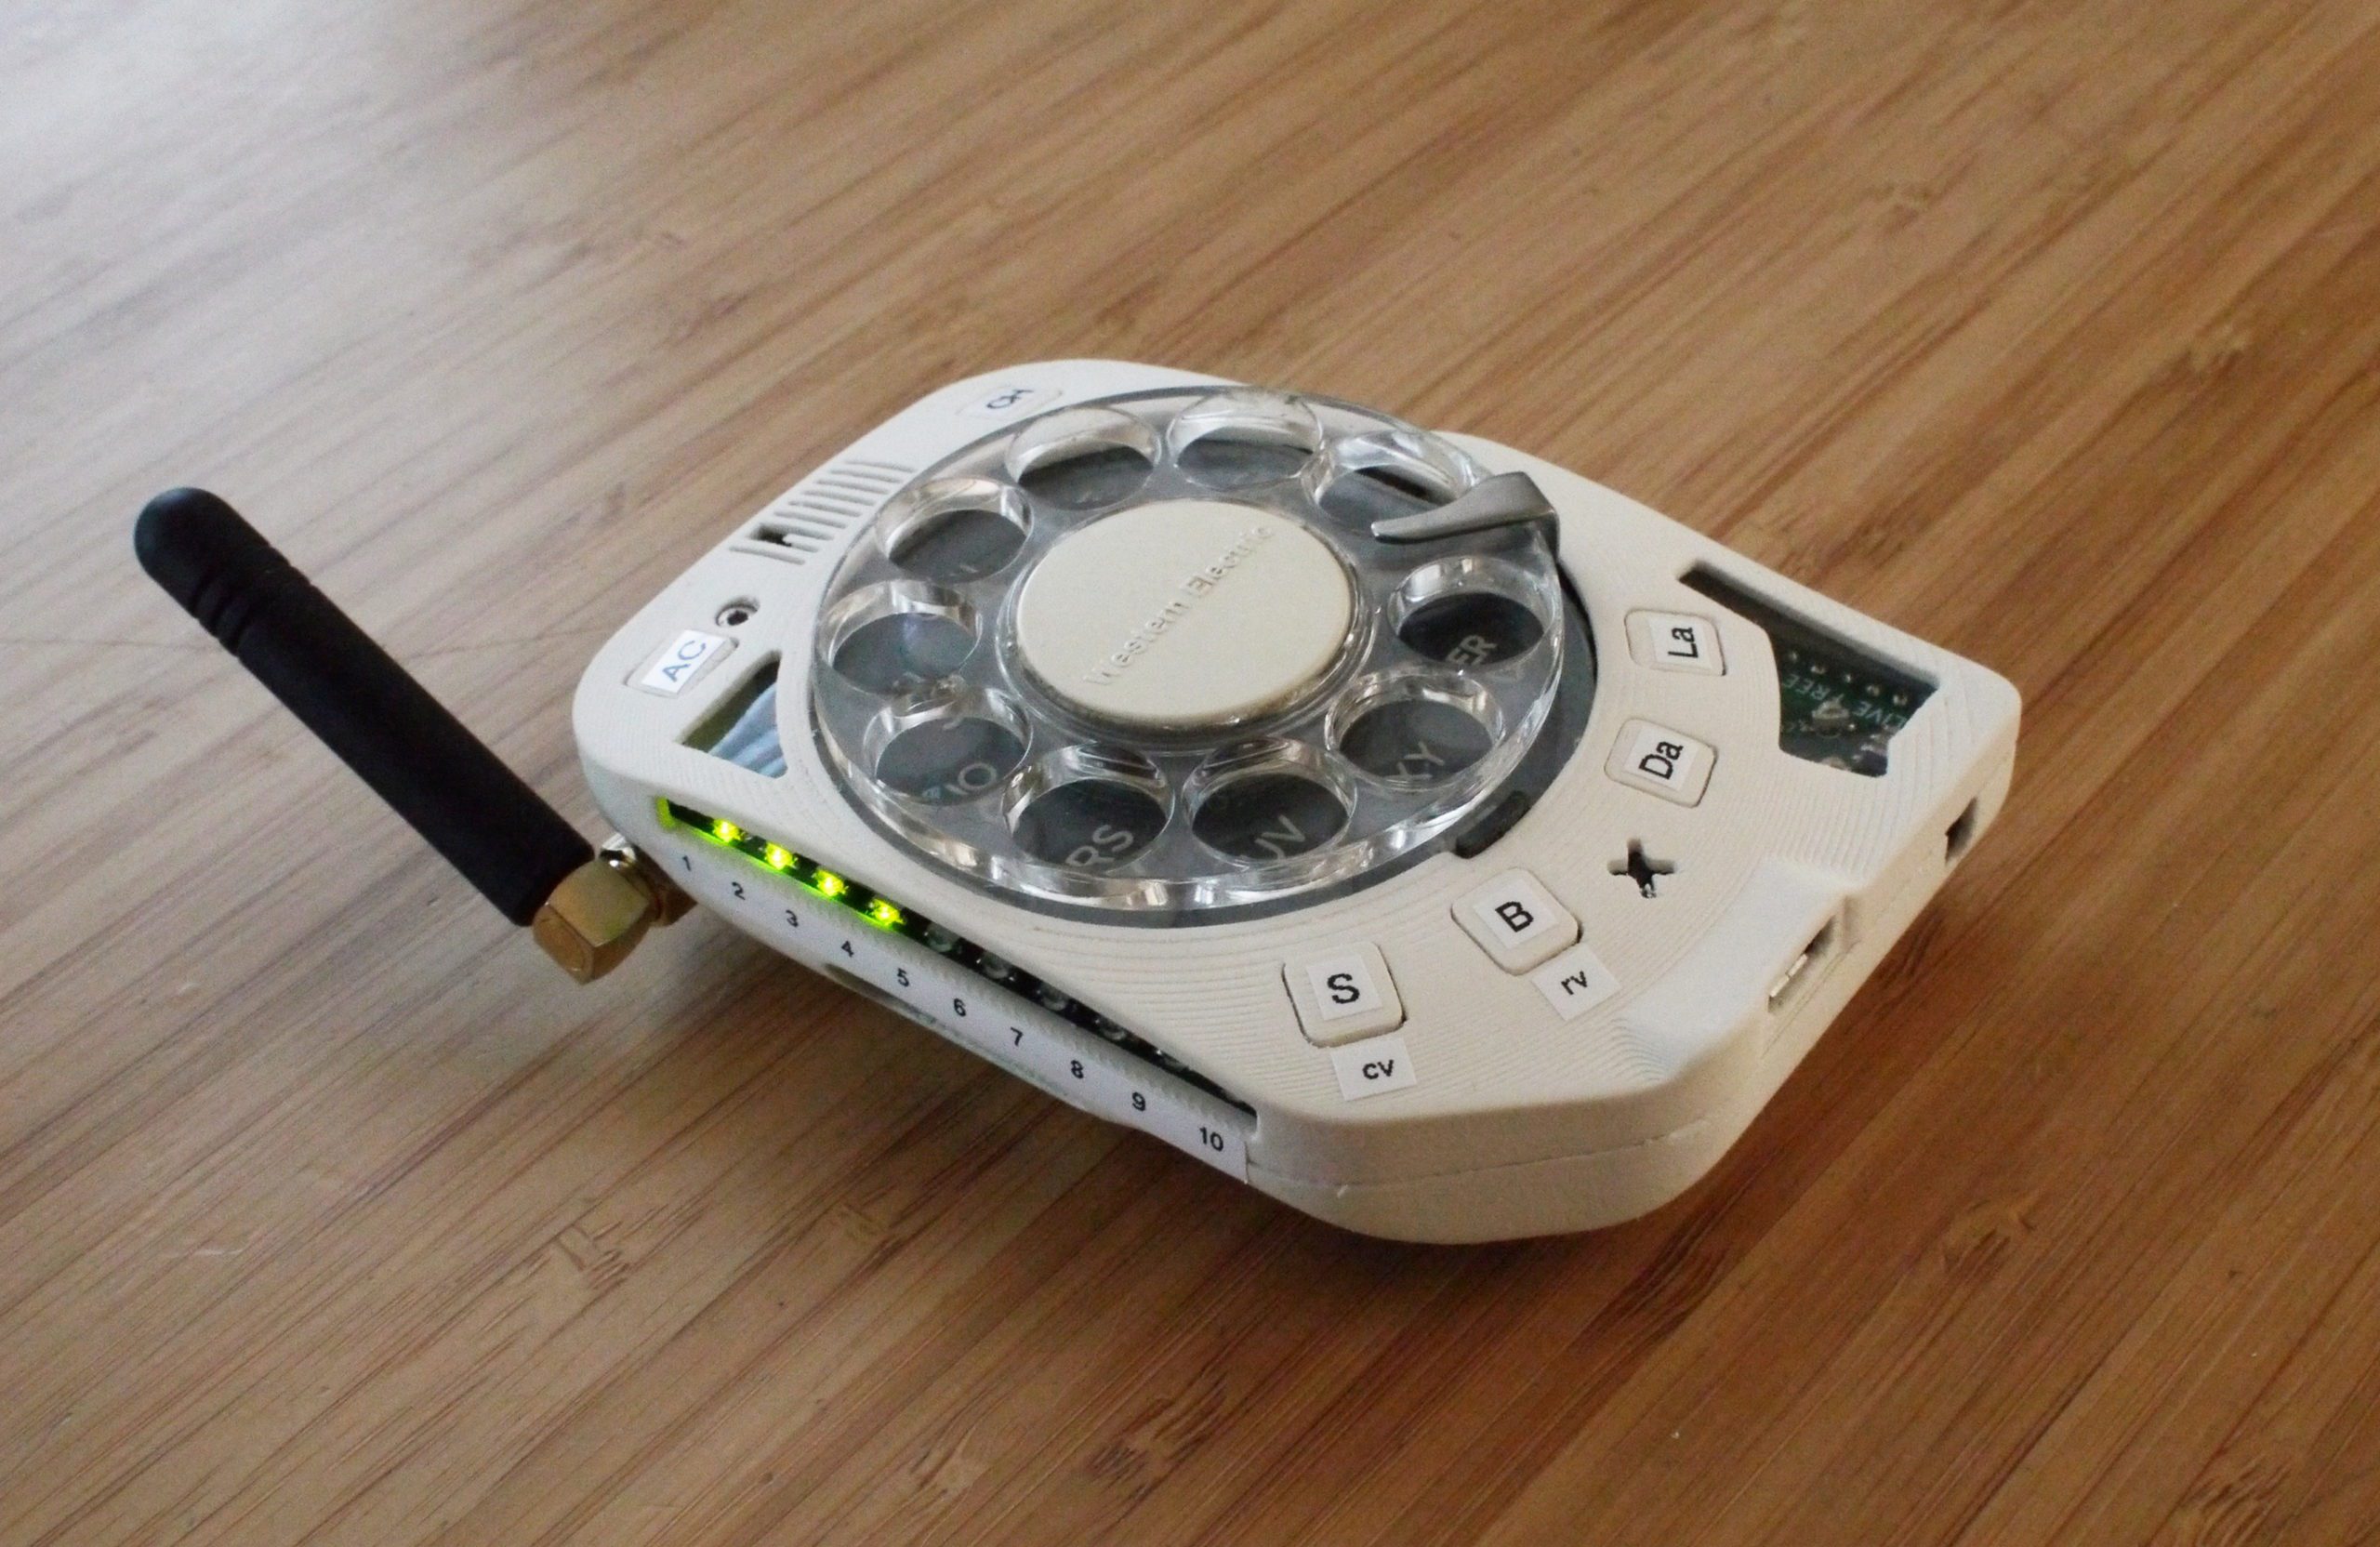 The Distraction-Free Rotary Cellphone